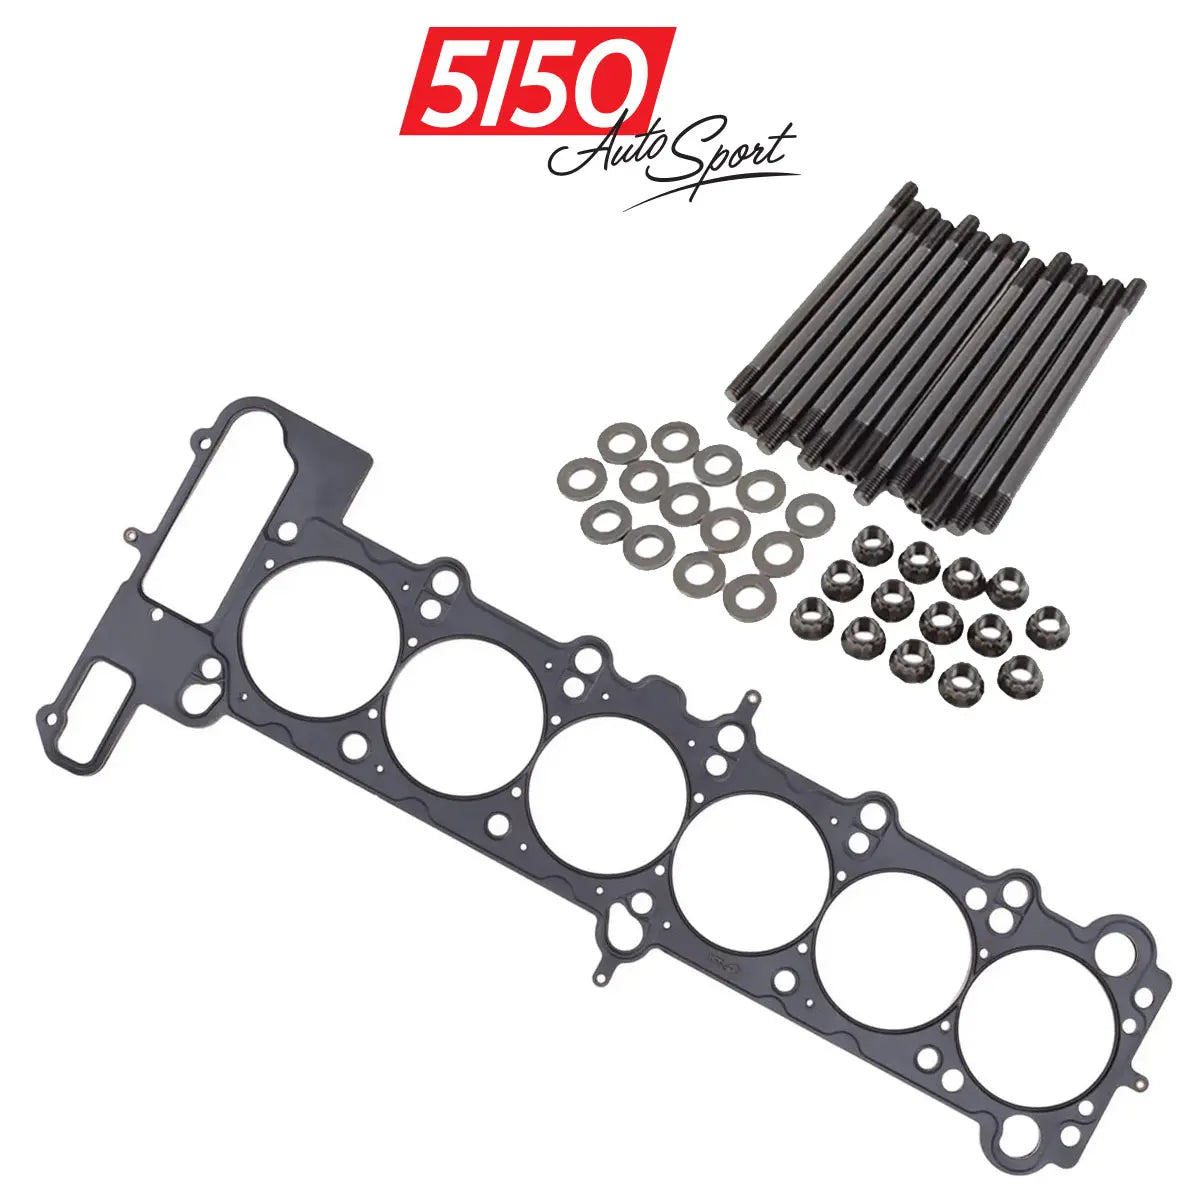 Multi-Layered Steel Head Gasket and ARP2000 Head Stud Kit for BMW M50 M52 S50 S52 Engines E36 M3